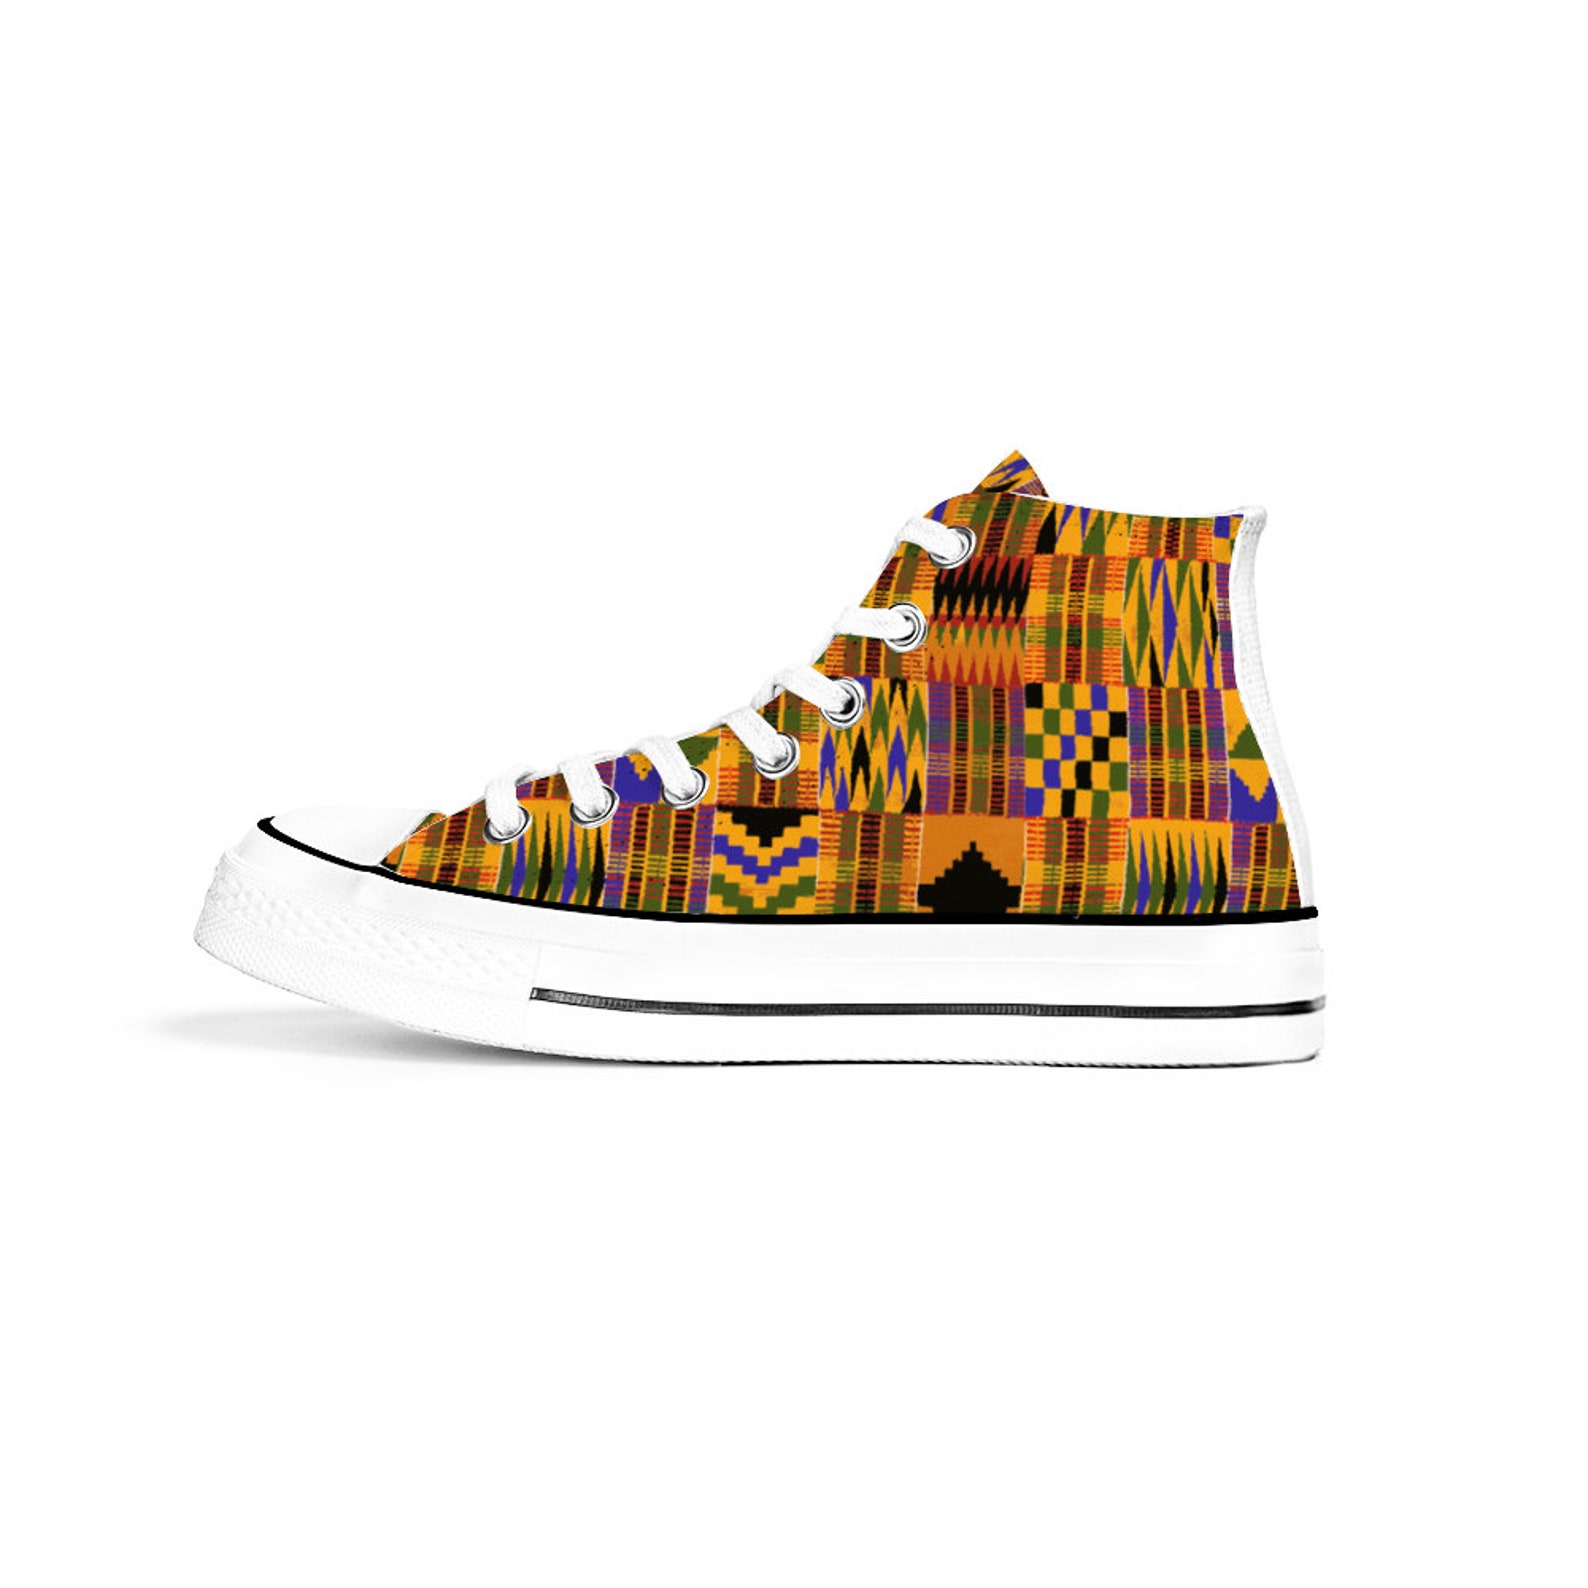 Kente African Print Unisex High Top Slip-on Canvas Sneakers Shoes - Etsy